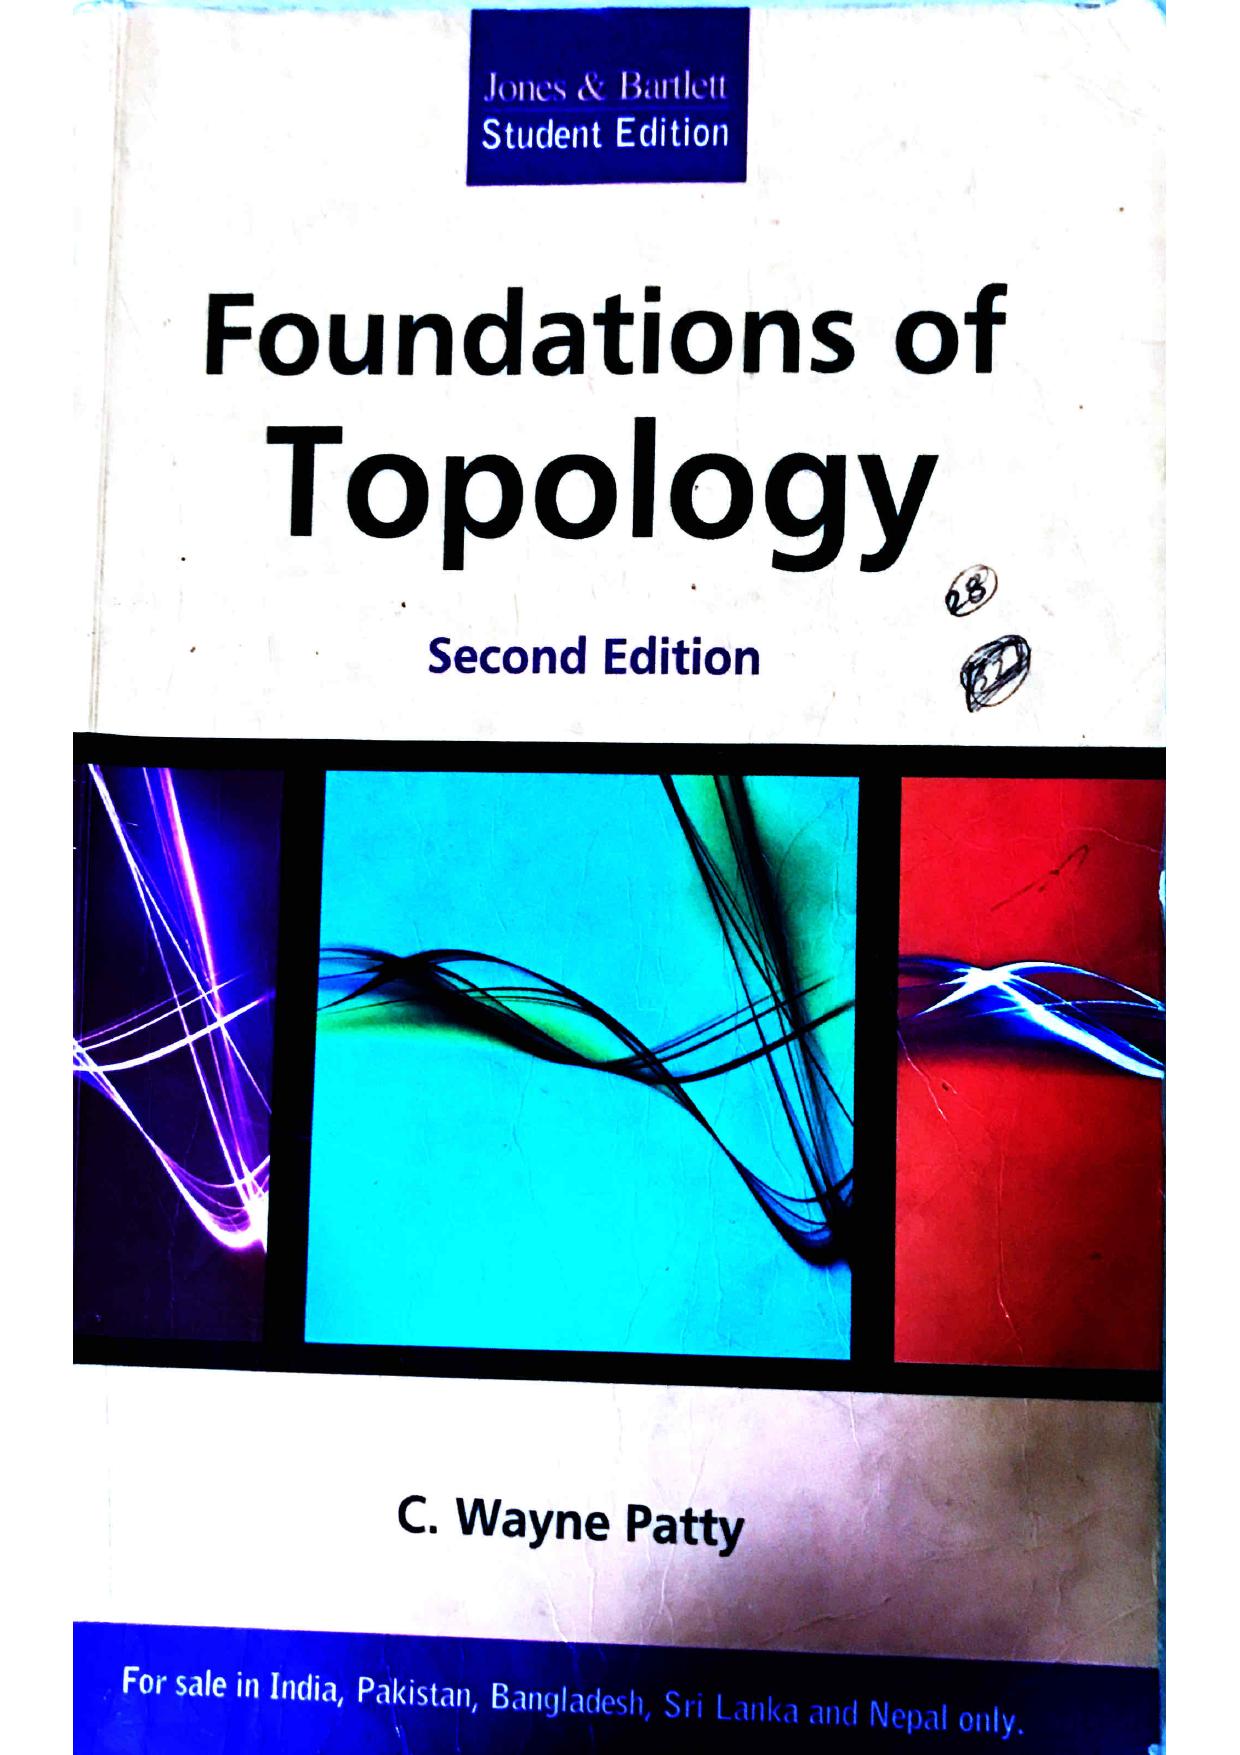 Foundations of Topology by C. Wayne Patty